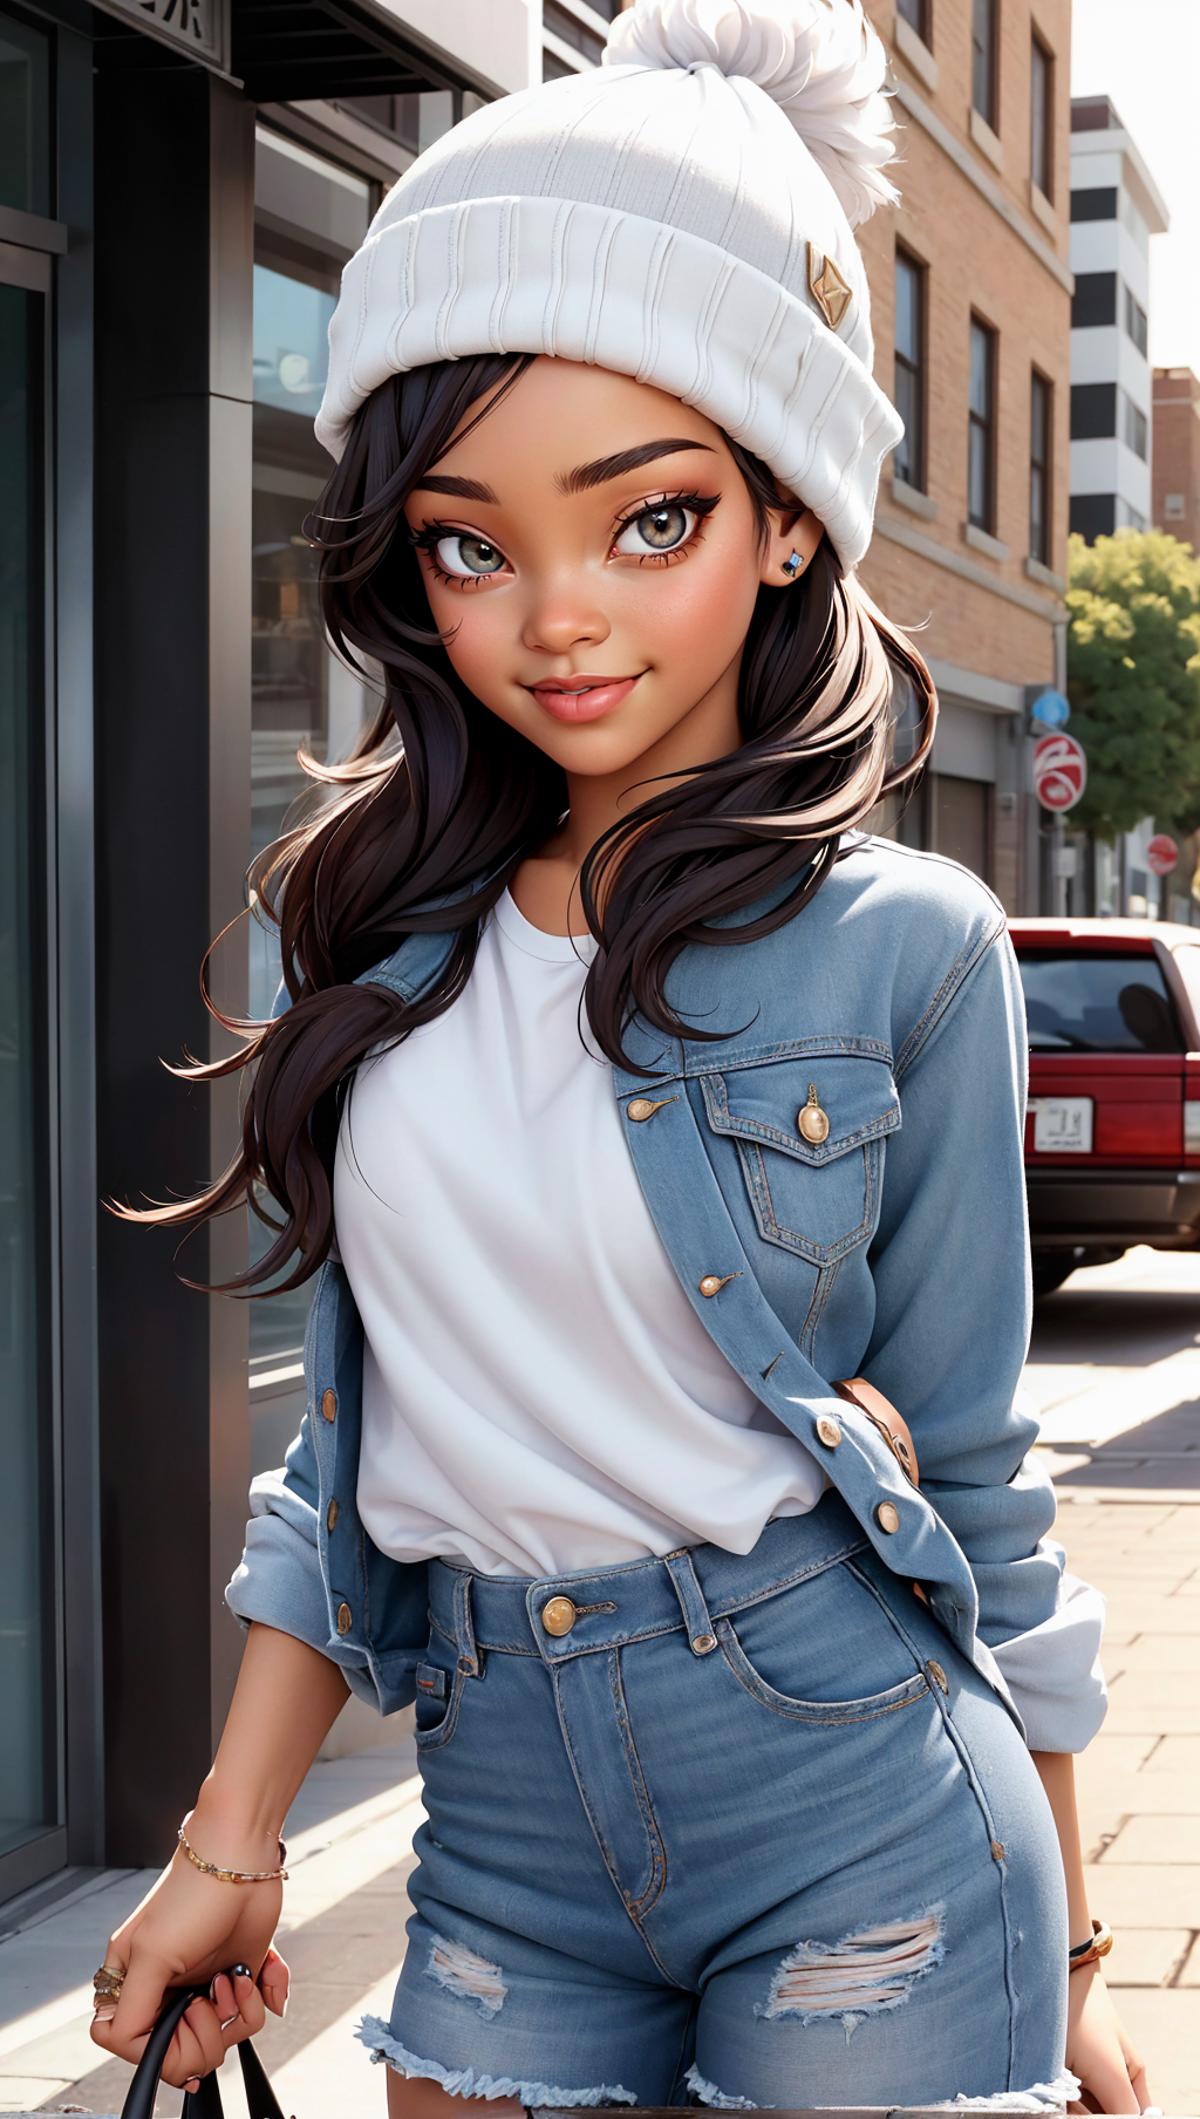 A cartoon image of a woman wearing a white shirt and blue jean jacket.